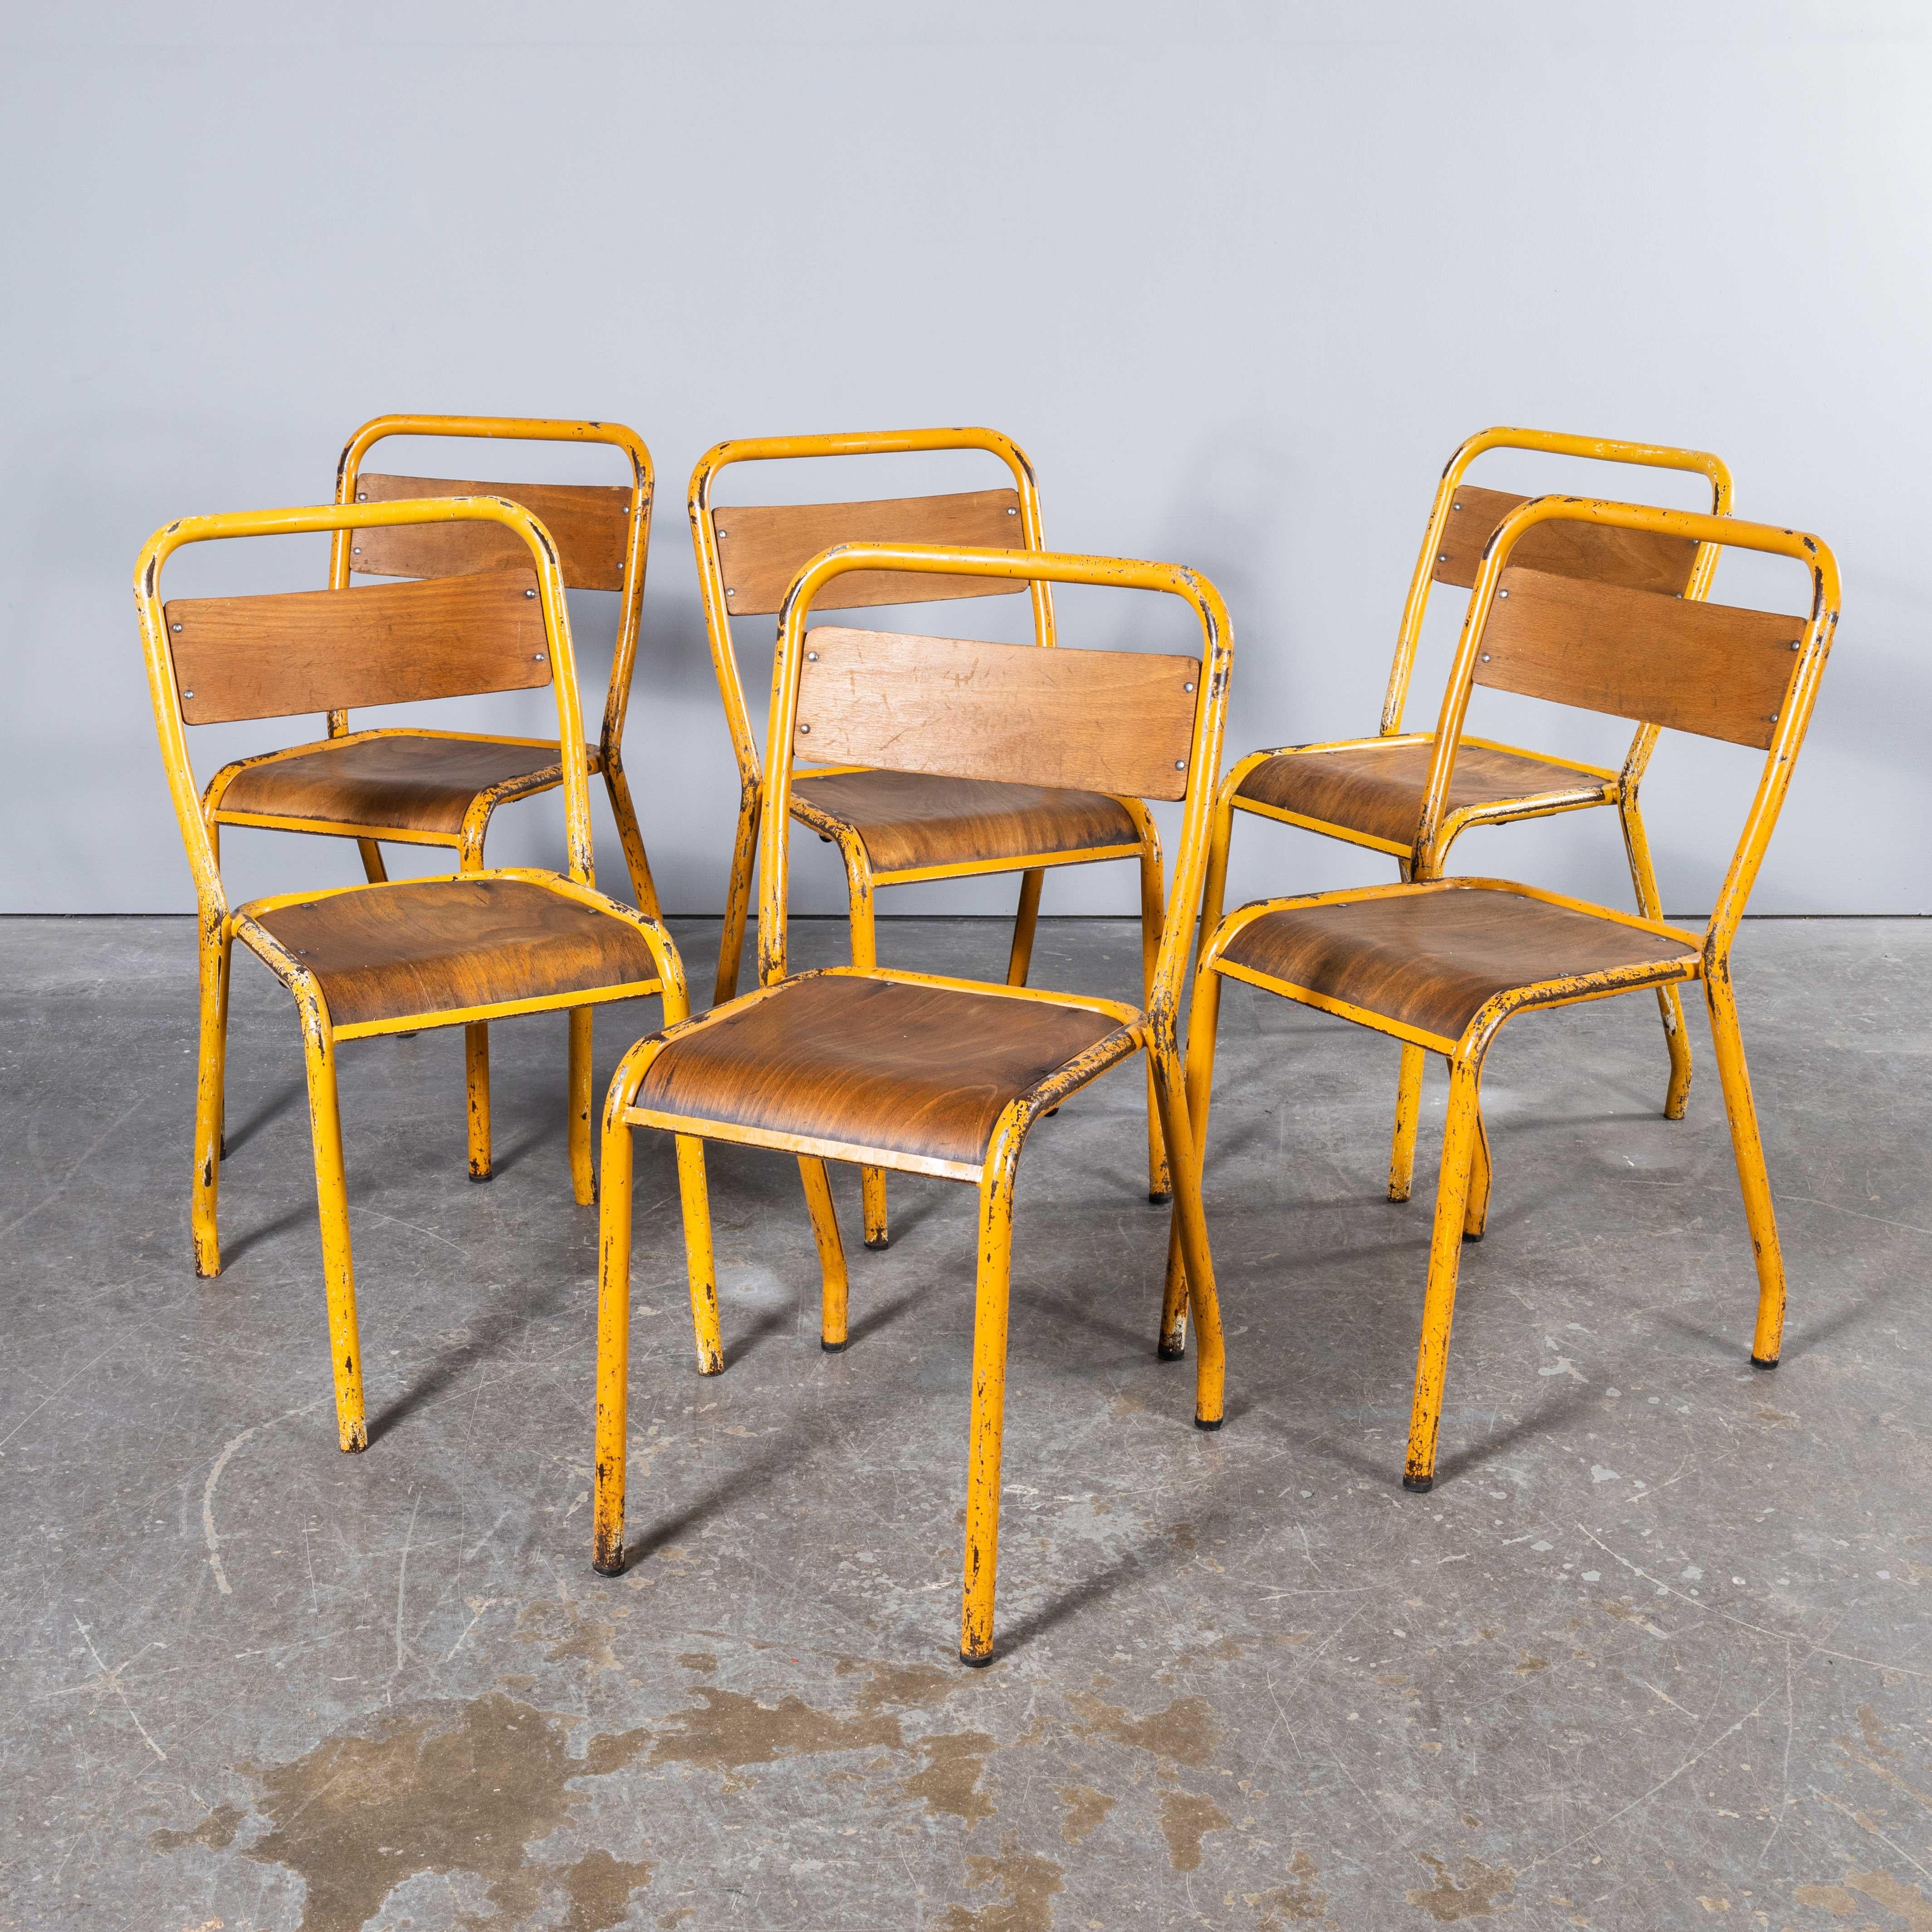 1950's Original Yellow French Tolix Wood Seat Metal Bistro Dining Chair - Large  For Sale 3